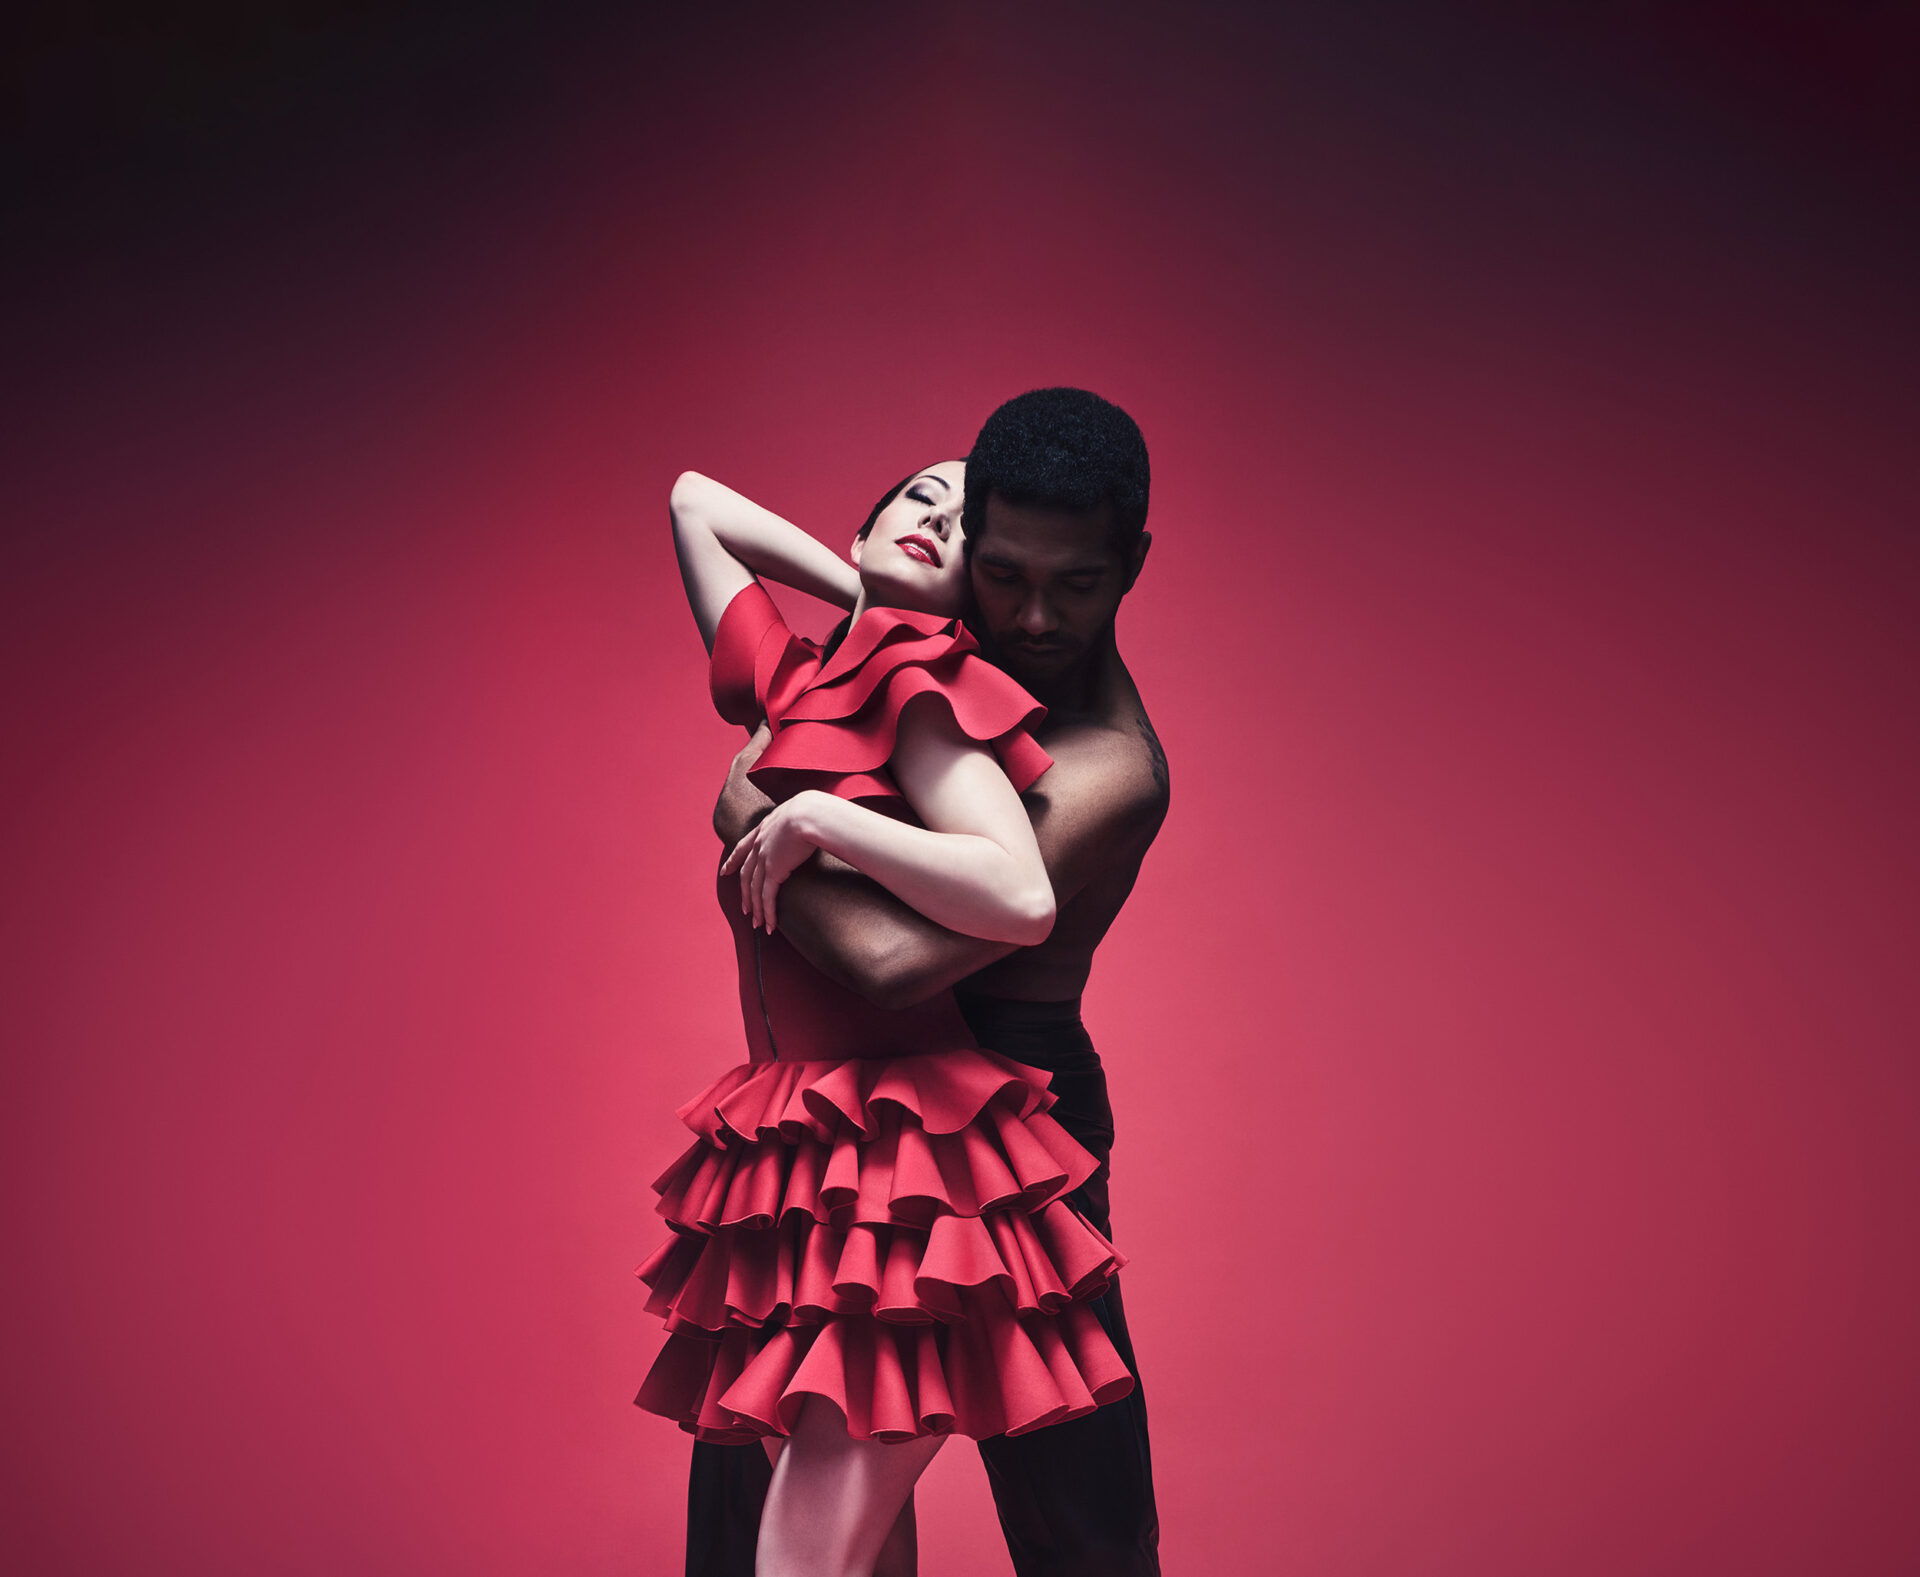 A dancer playing the role of Carmen and a dancer playing the role of Don Jose are shown in a sensual embrace over a dark red background. Carmen is wearing a short red dress with frills while Don Jose is wearing dark trousers.